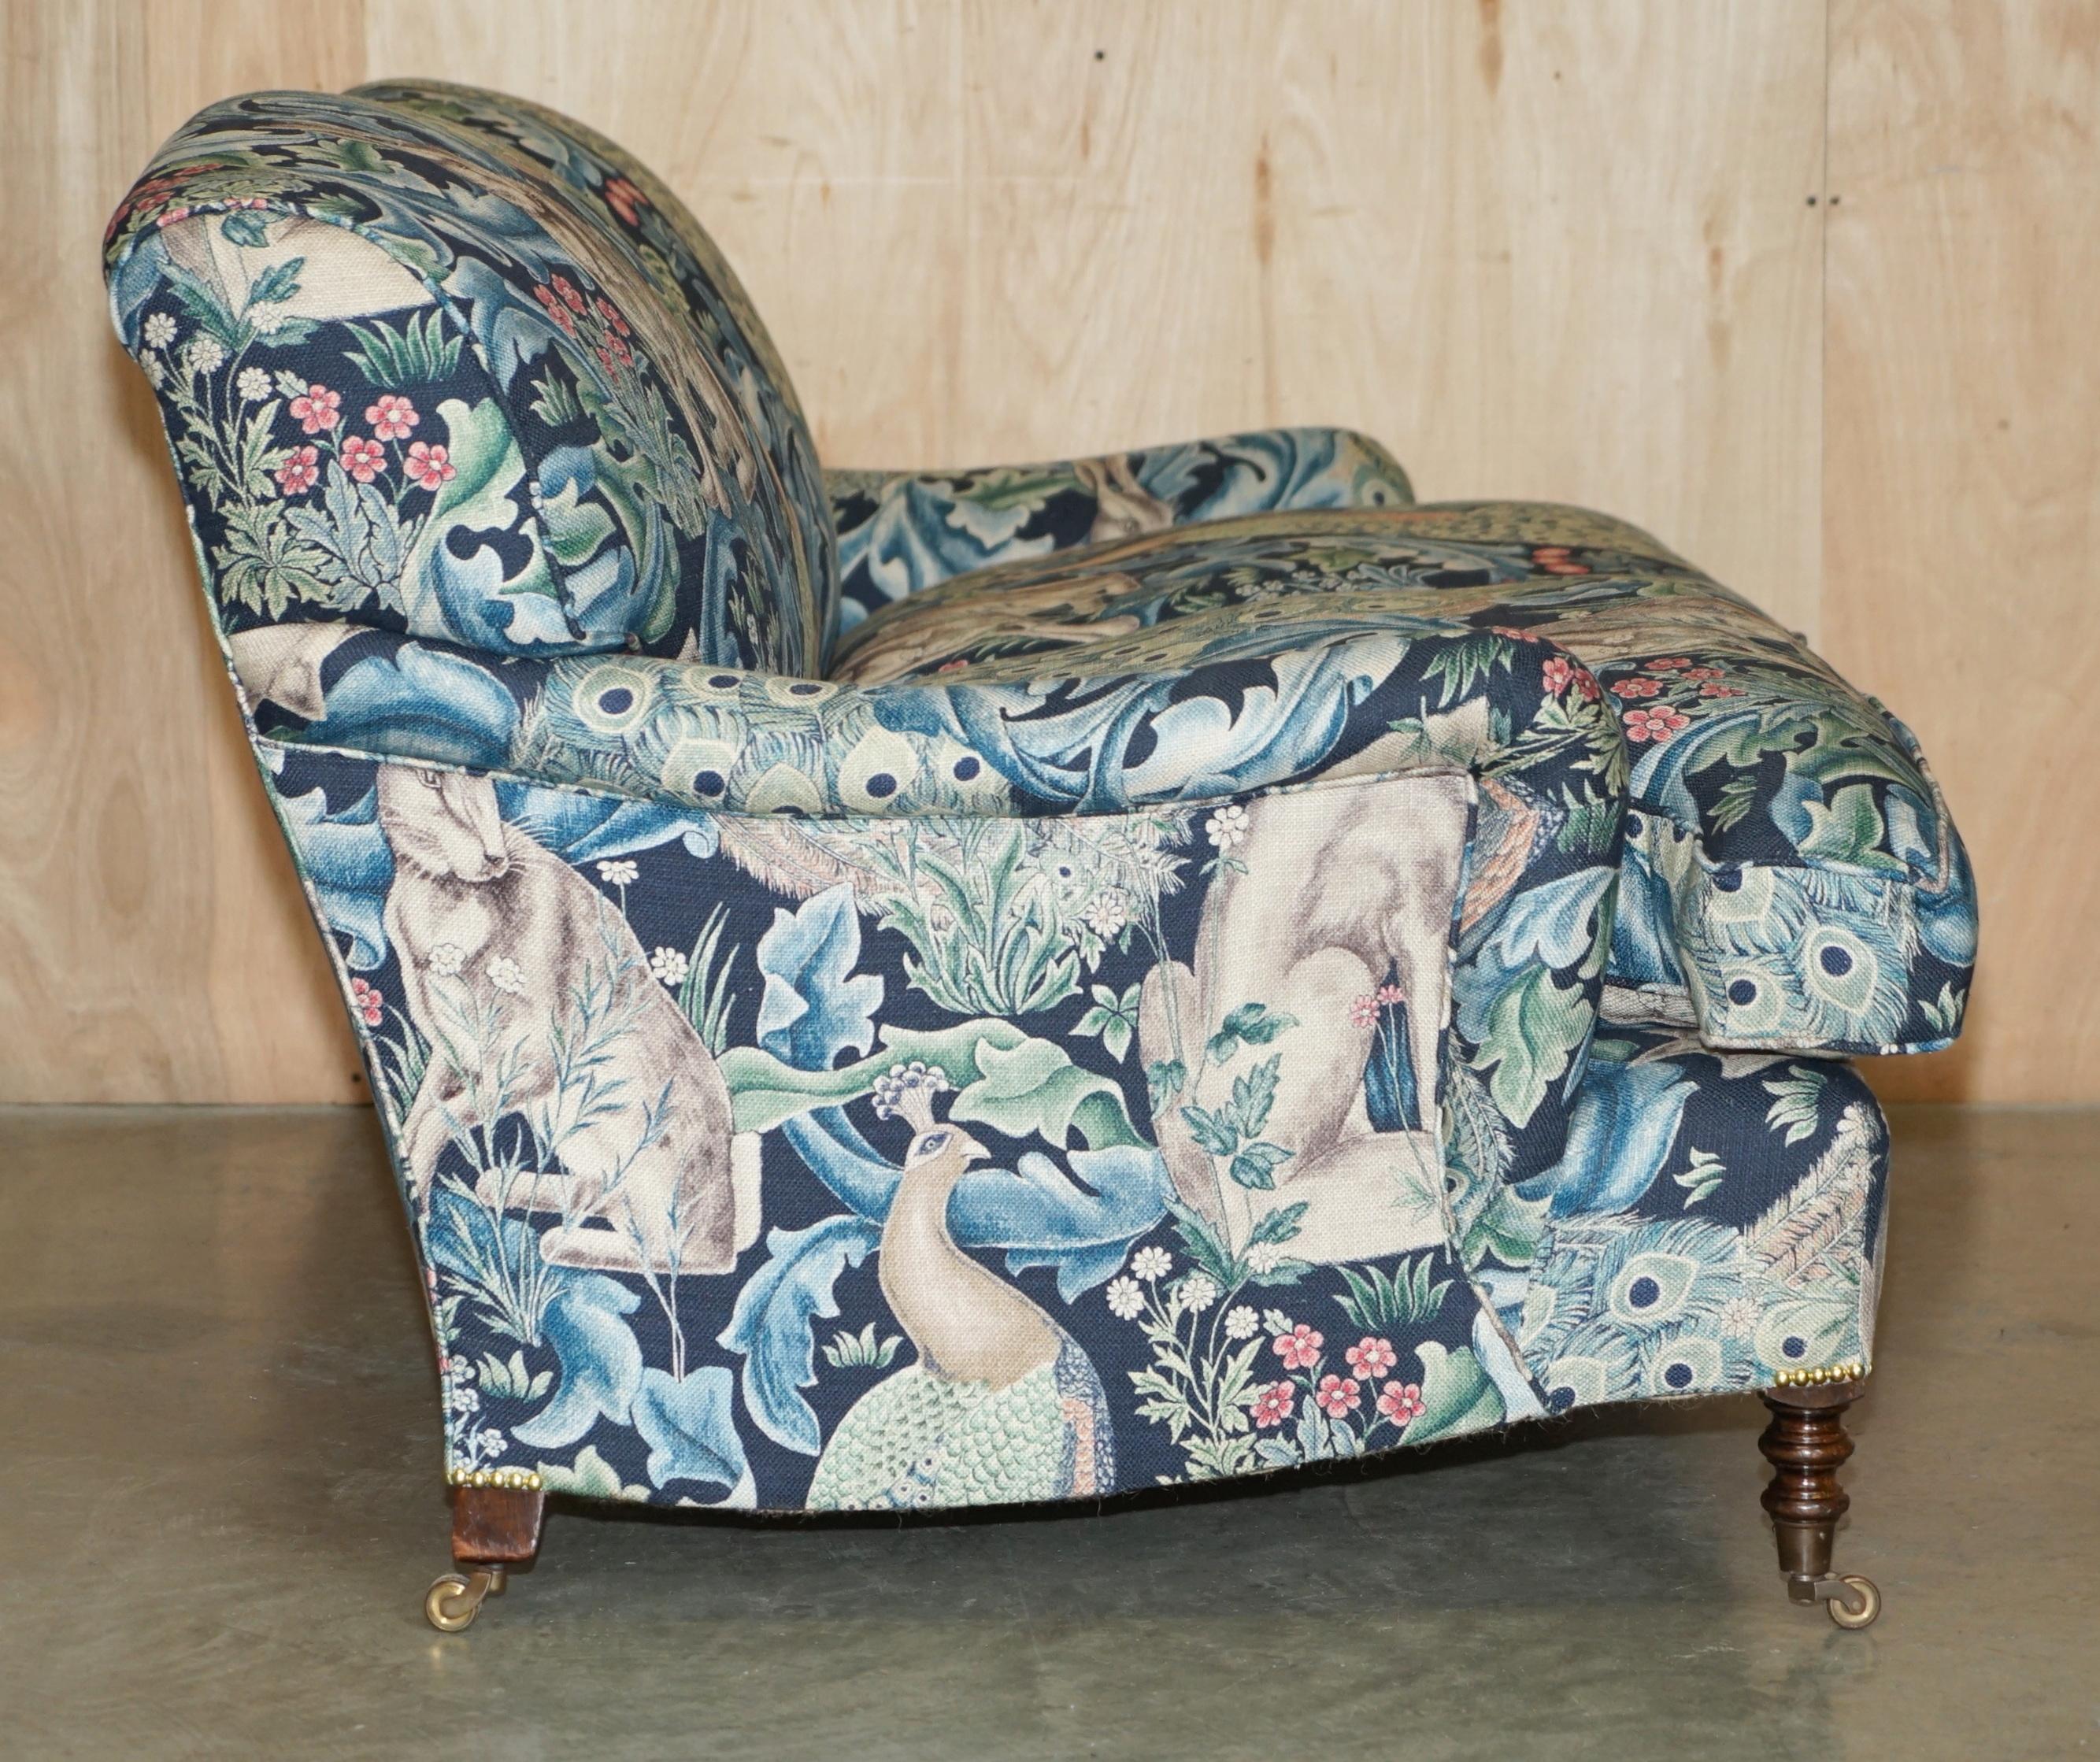  GEORGE SMiTH HOWARD & SON'S WILLIAM MORRIS SOFA ARMCHAIR SUITE For Sale 1